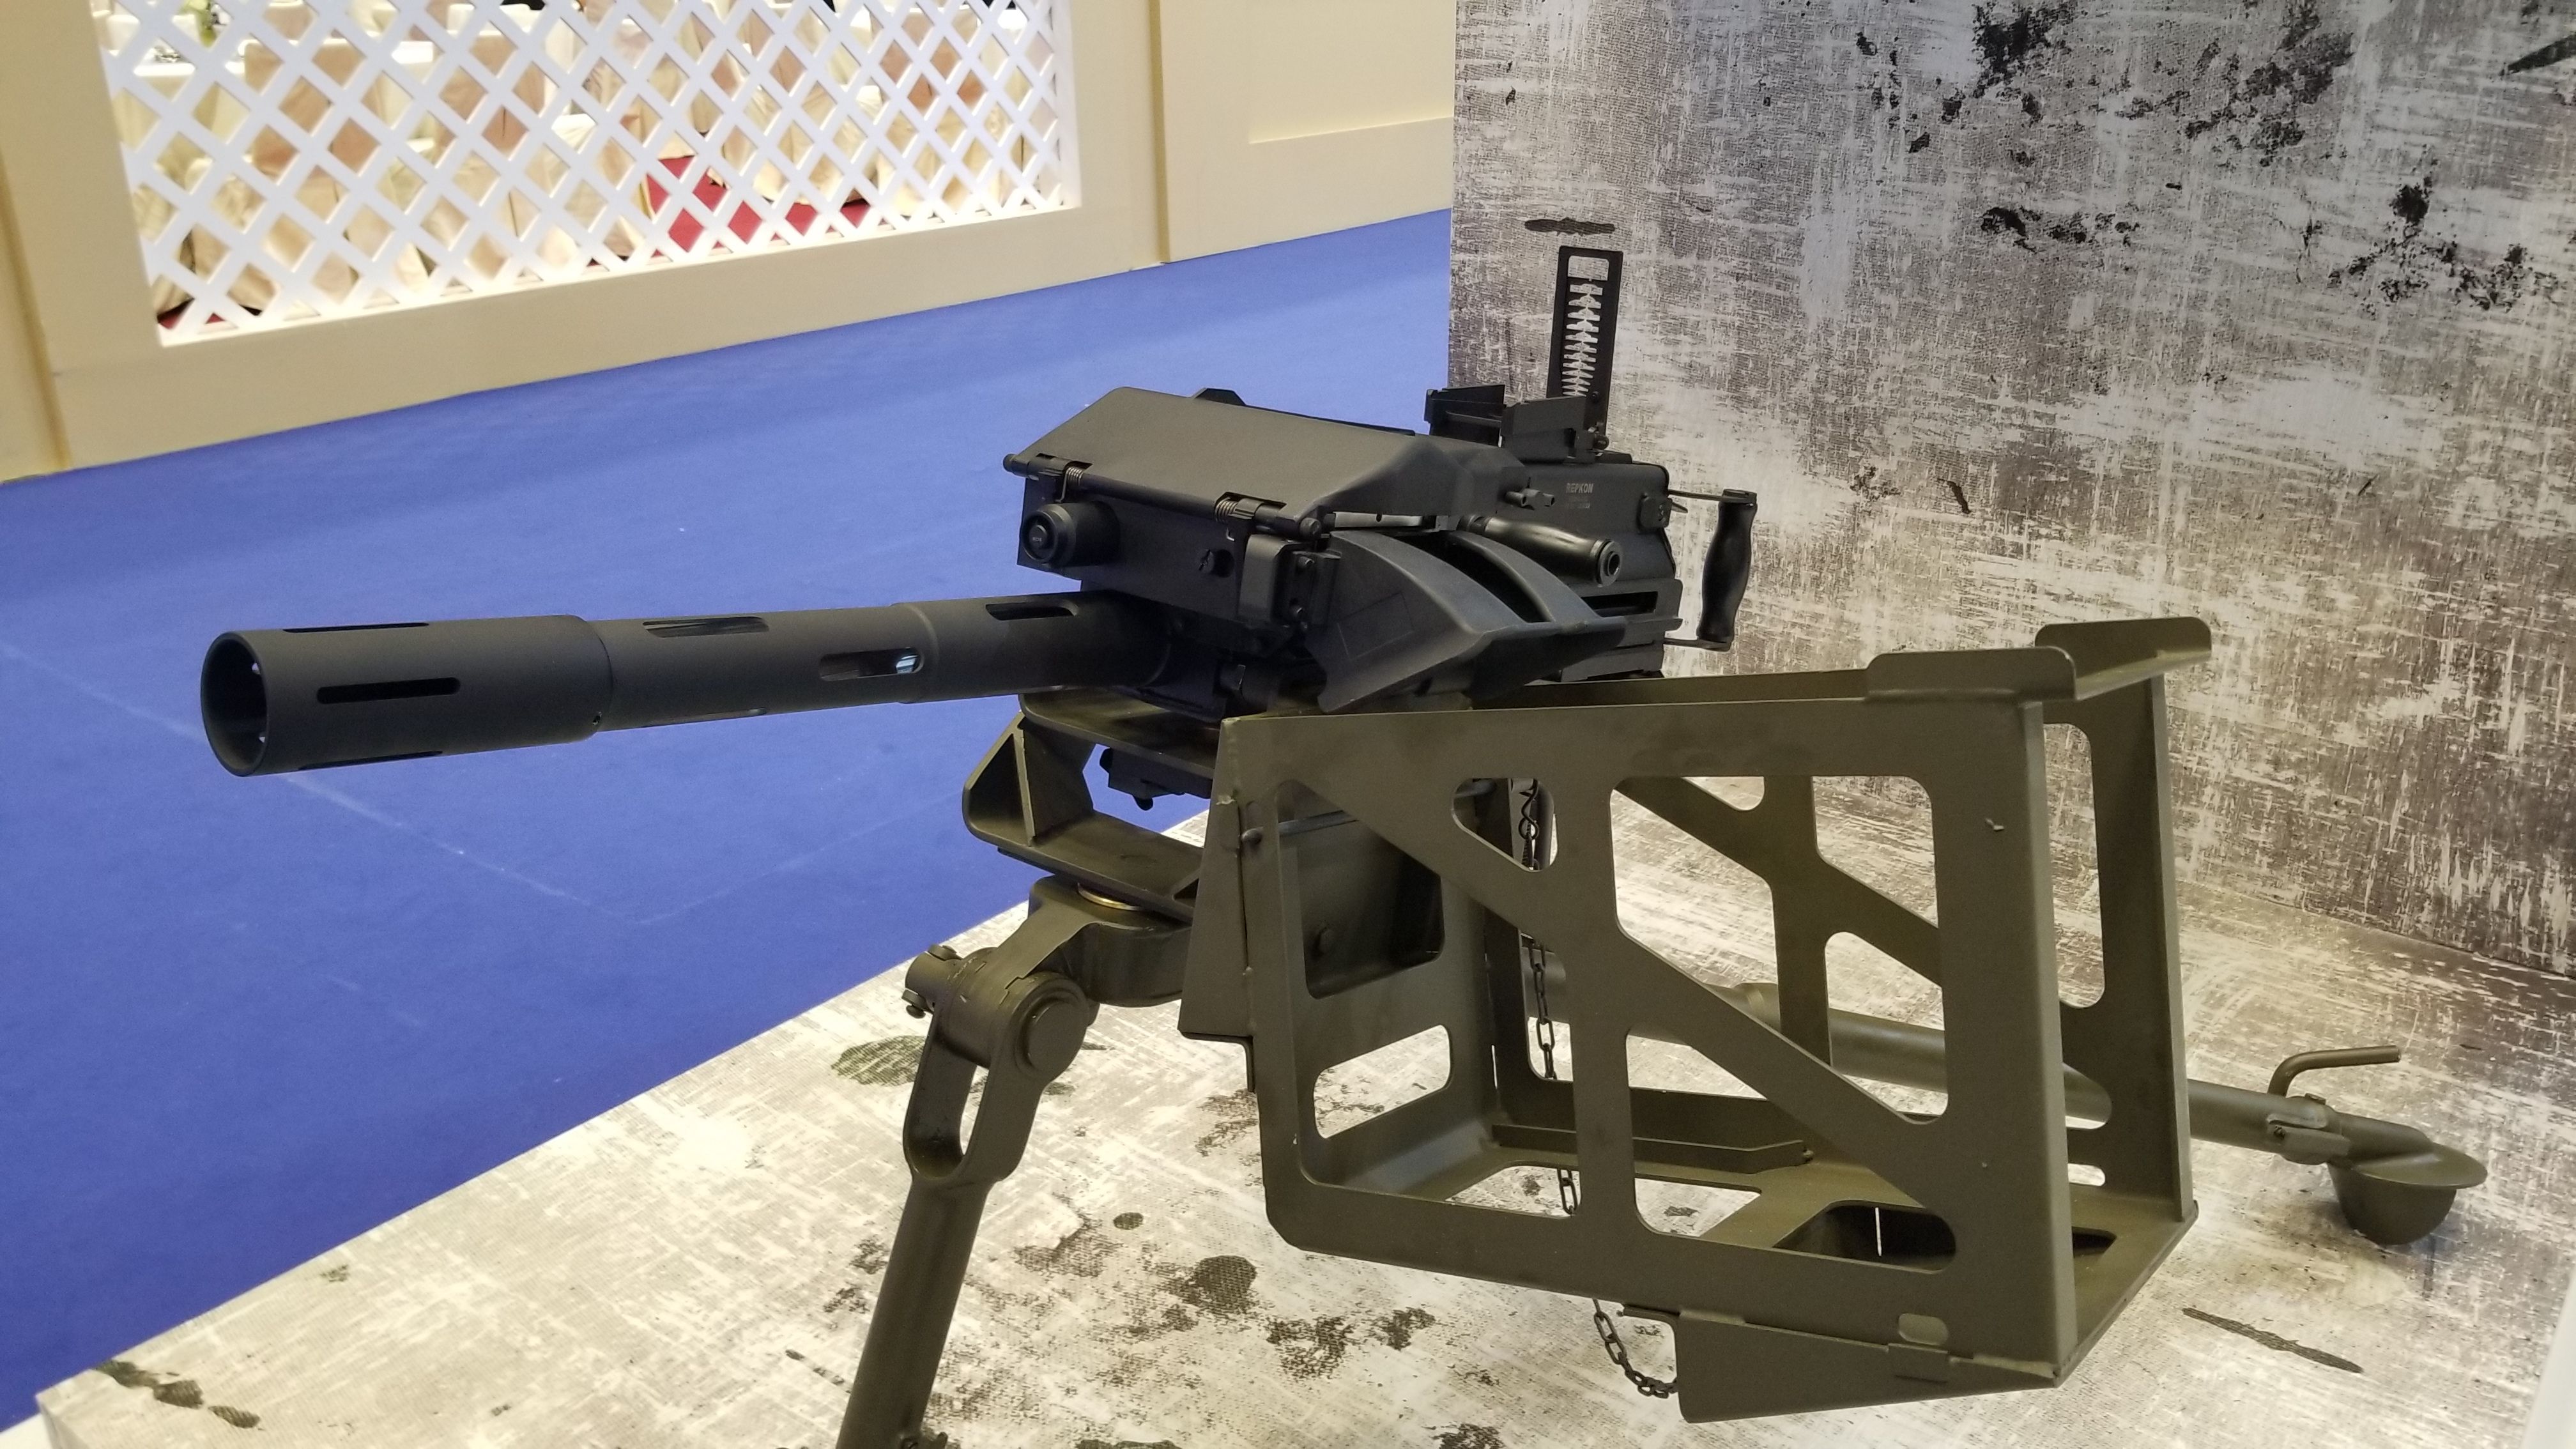 Repkon Defence Presented 40 mm Automatic Grenade Launcher at DIMDEX and DSA